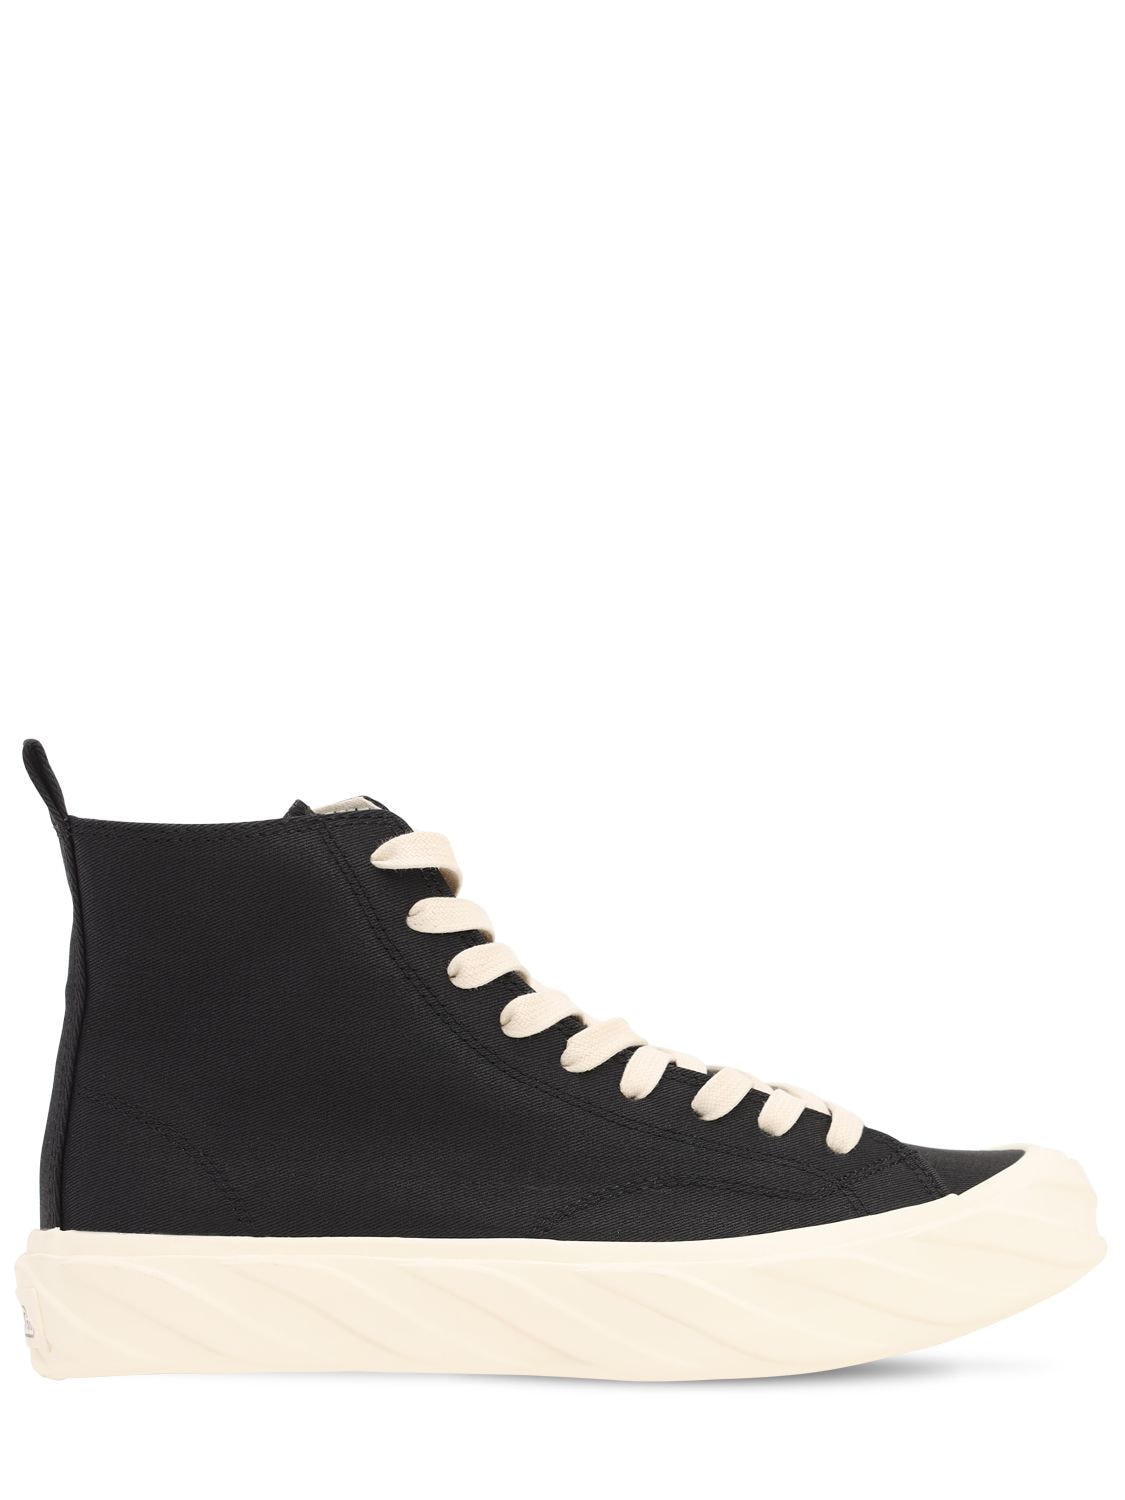 Carbon Coated Canvas High Top Sneakers